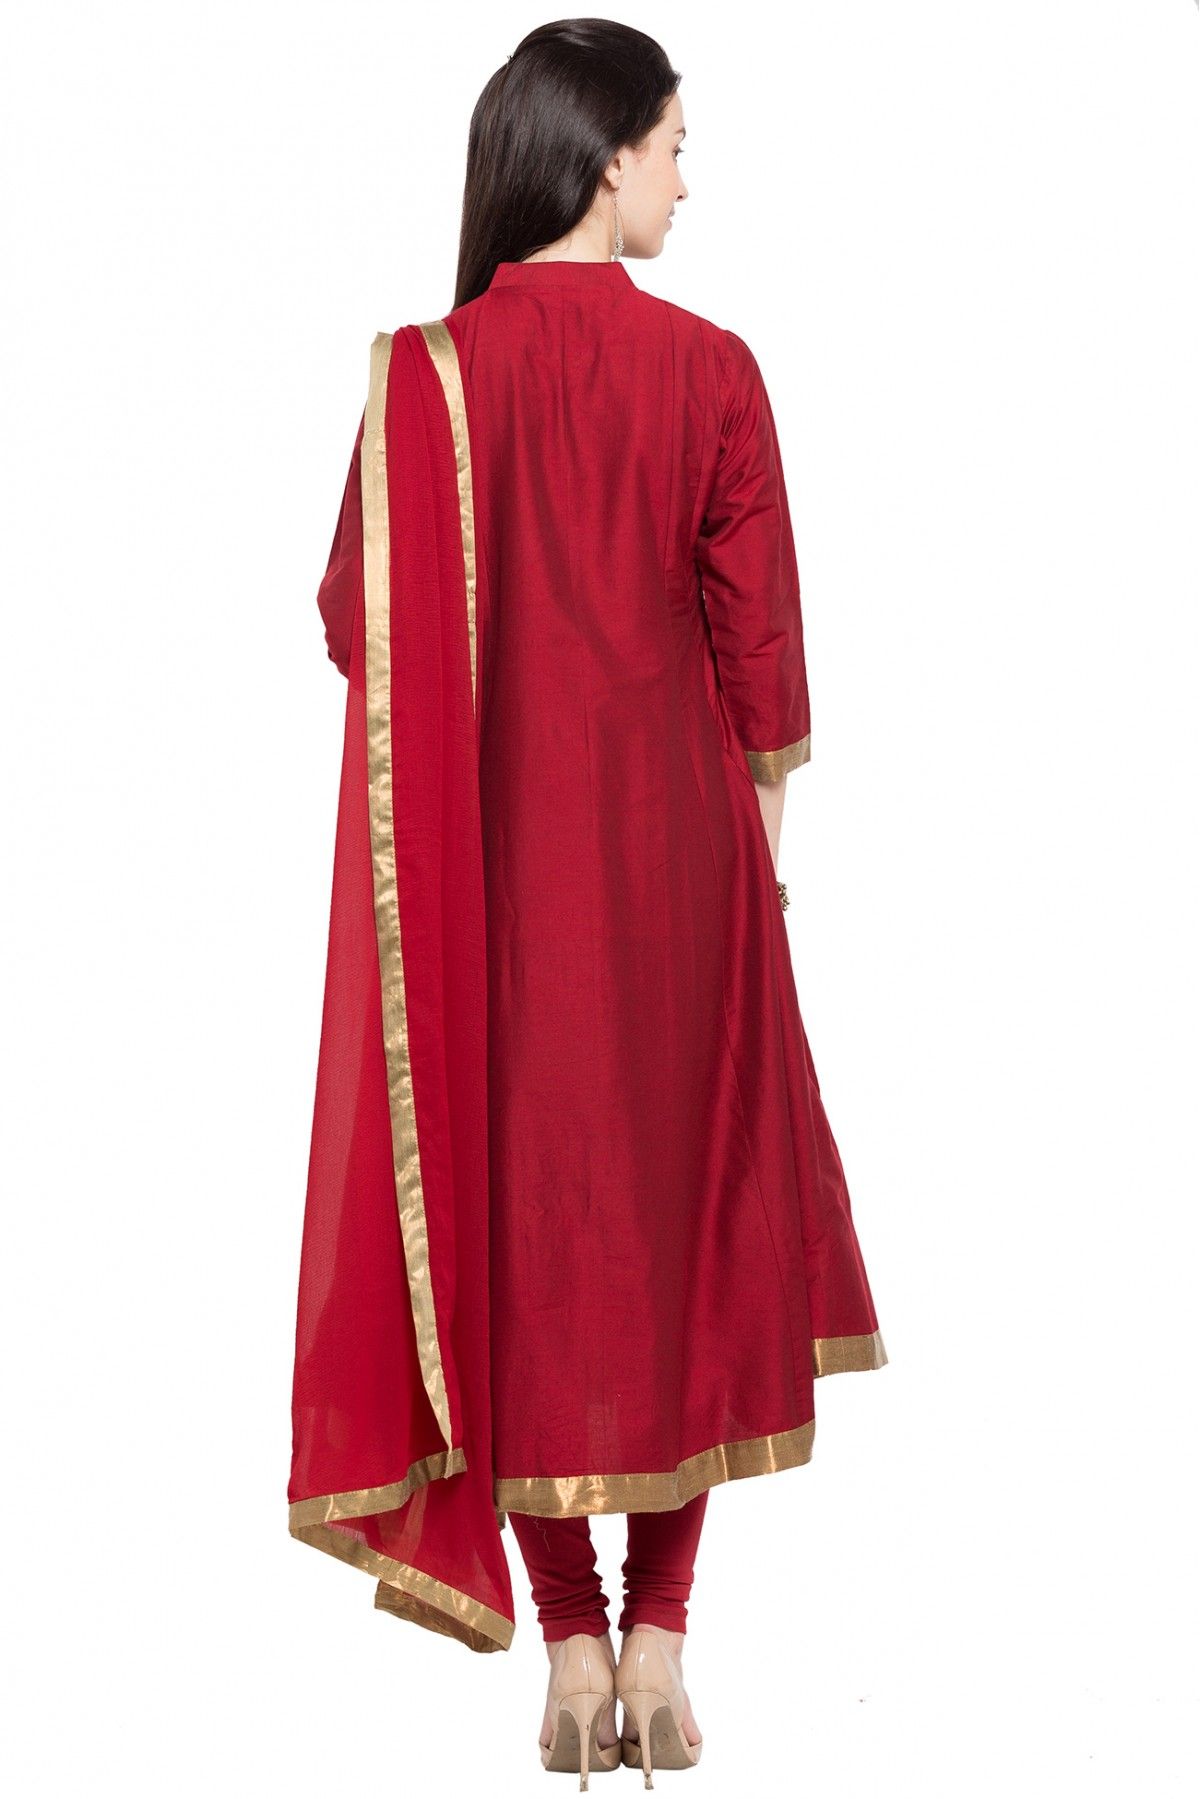 Plus Size Stitched Cotton Silk Anarkali Suit In Red Colour Upto 66